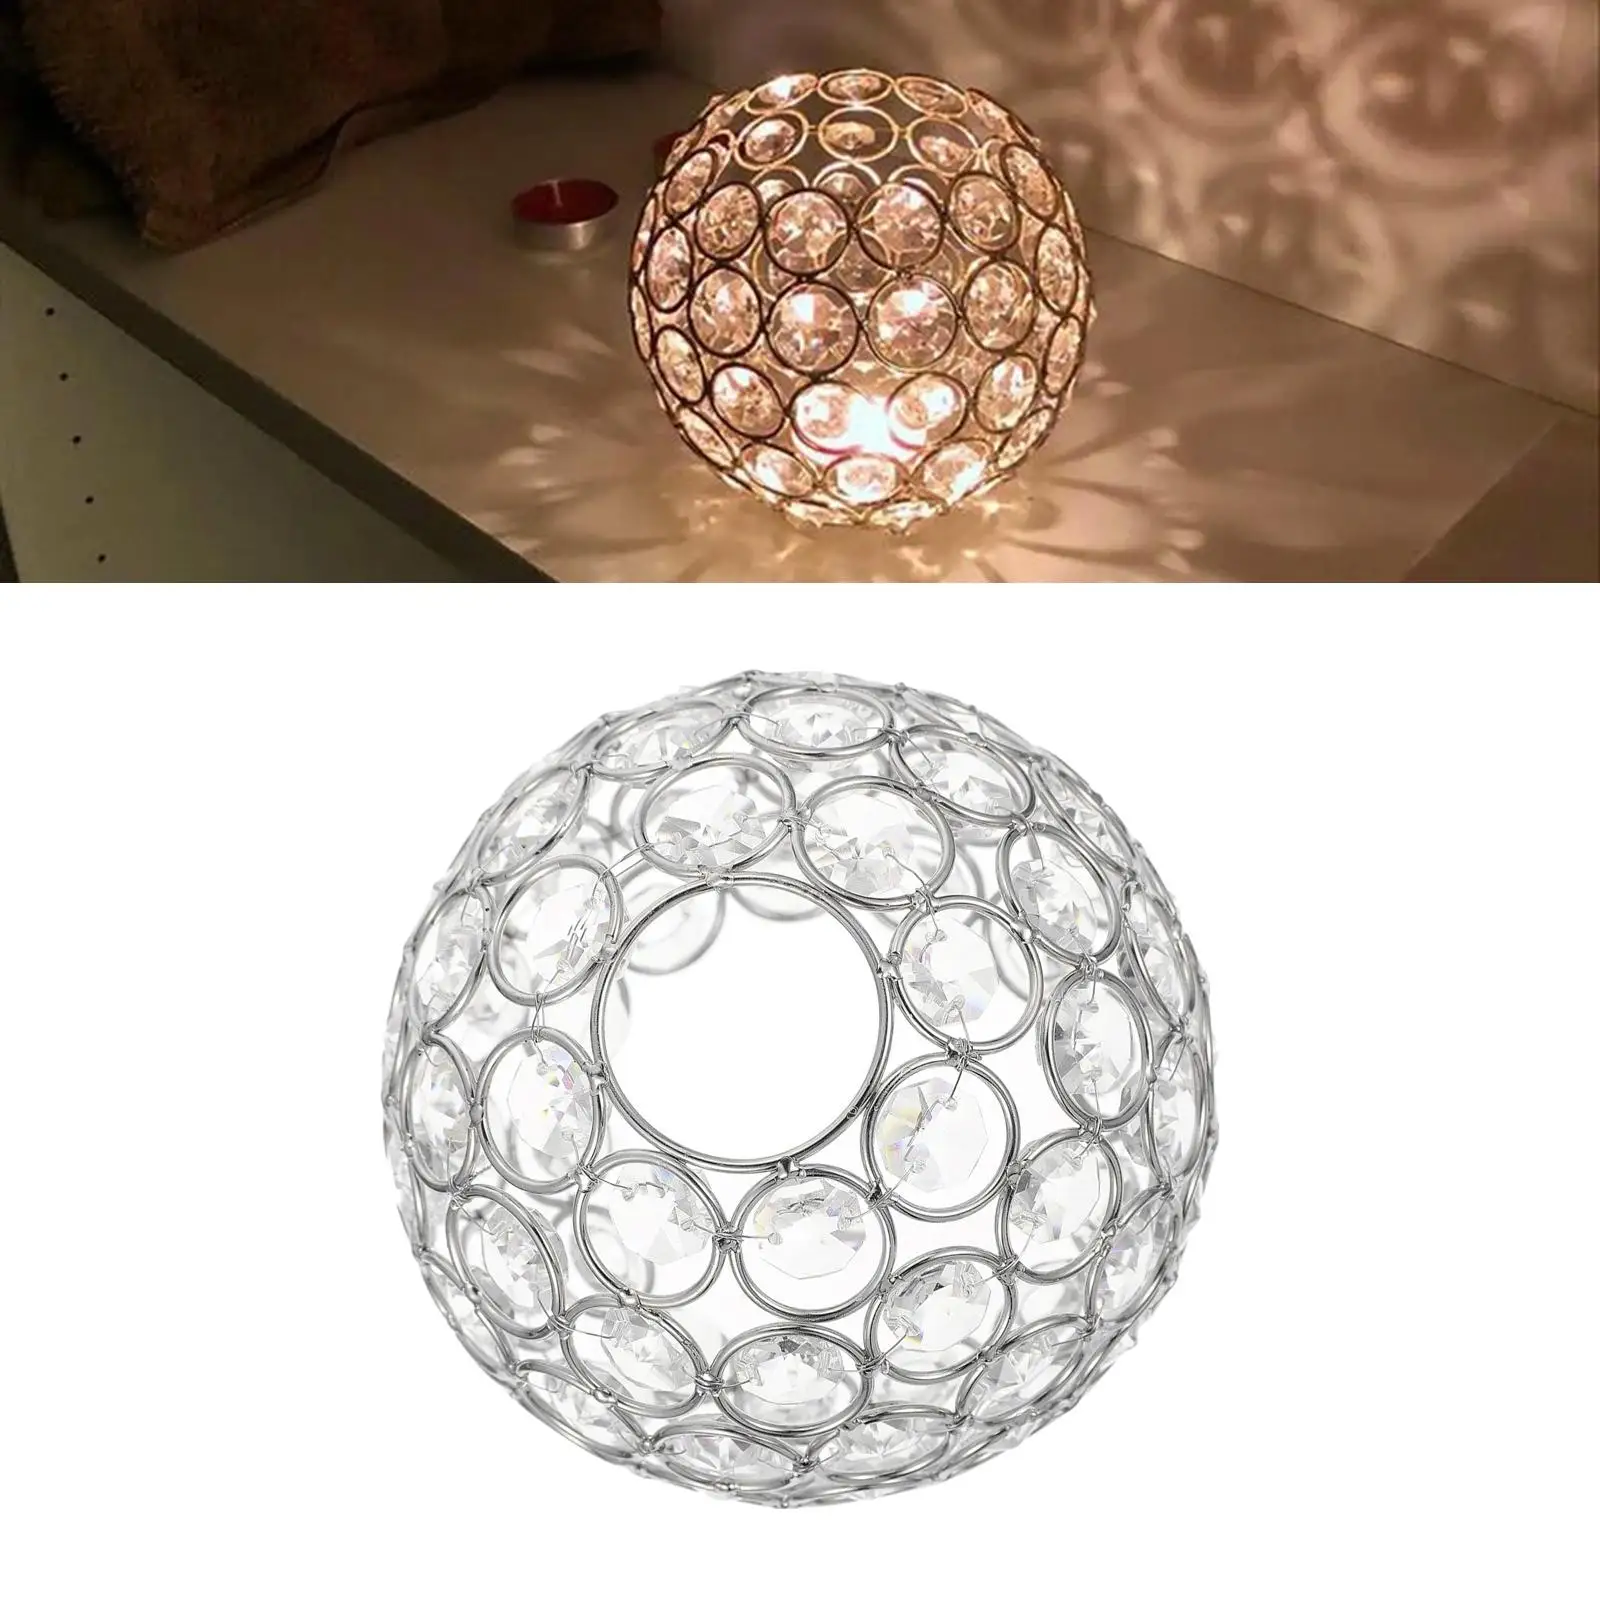 Ceiling Light Shade Replacement Cover Chandelier Crystal Lampshade Only for Antique Lamp Wall Lamp Floor Pendant Light Bathroom